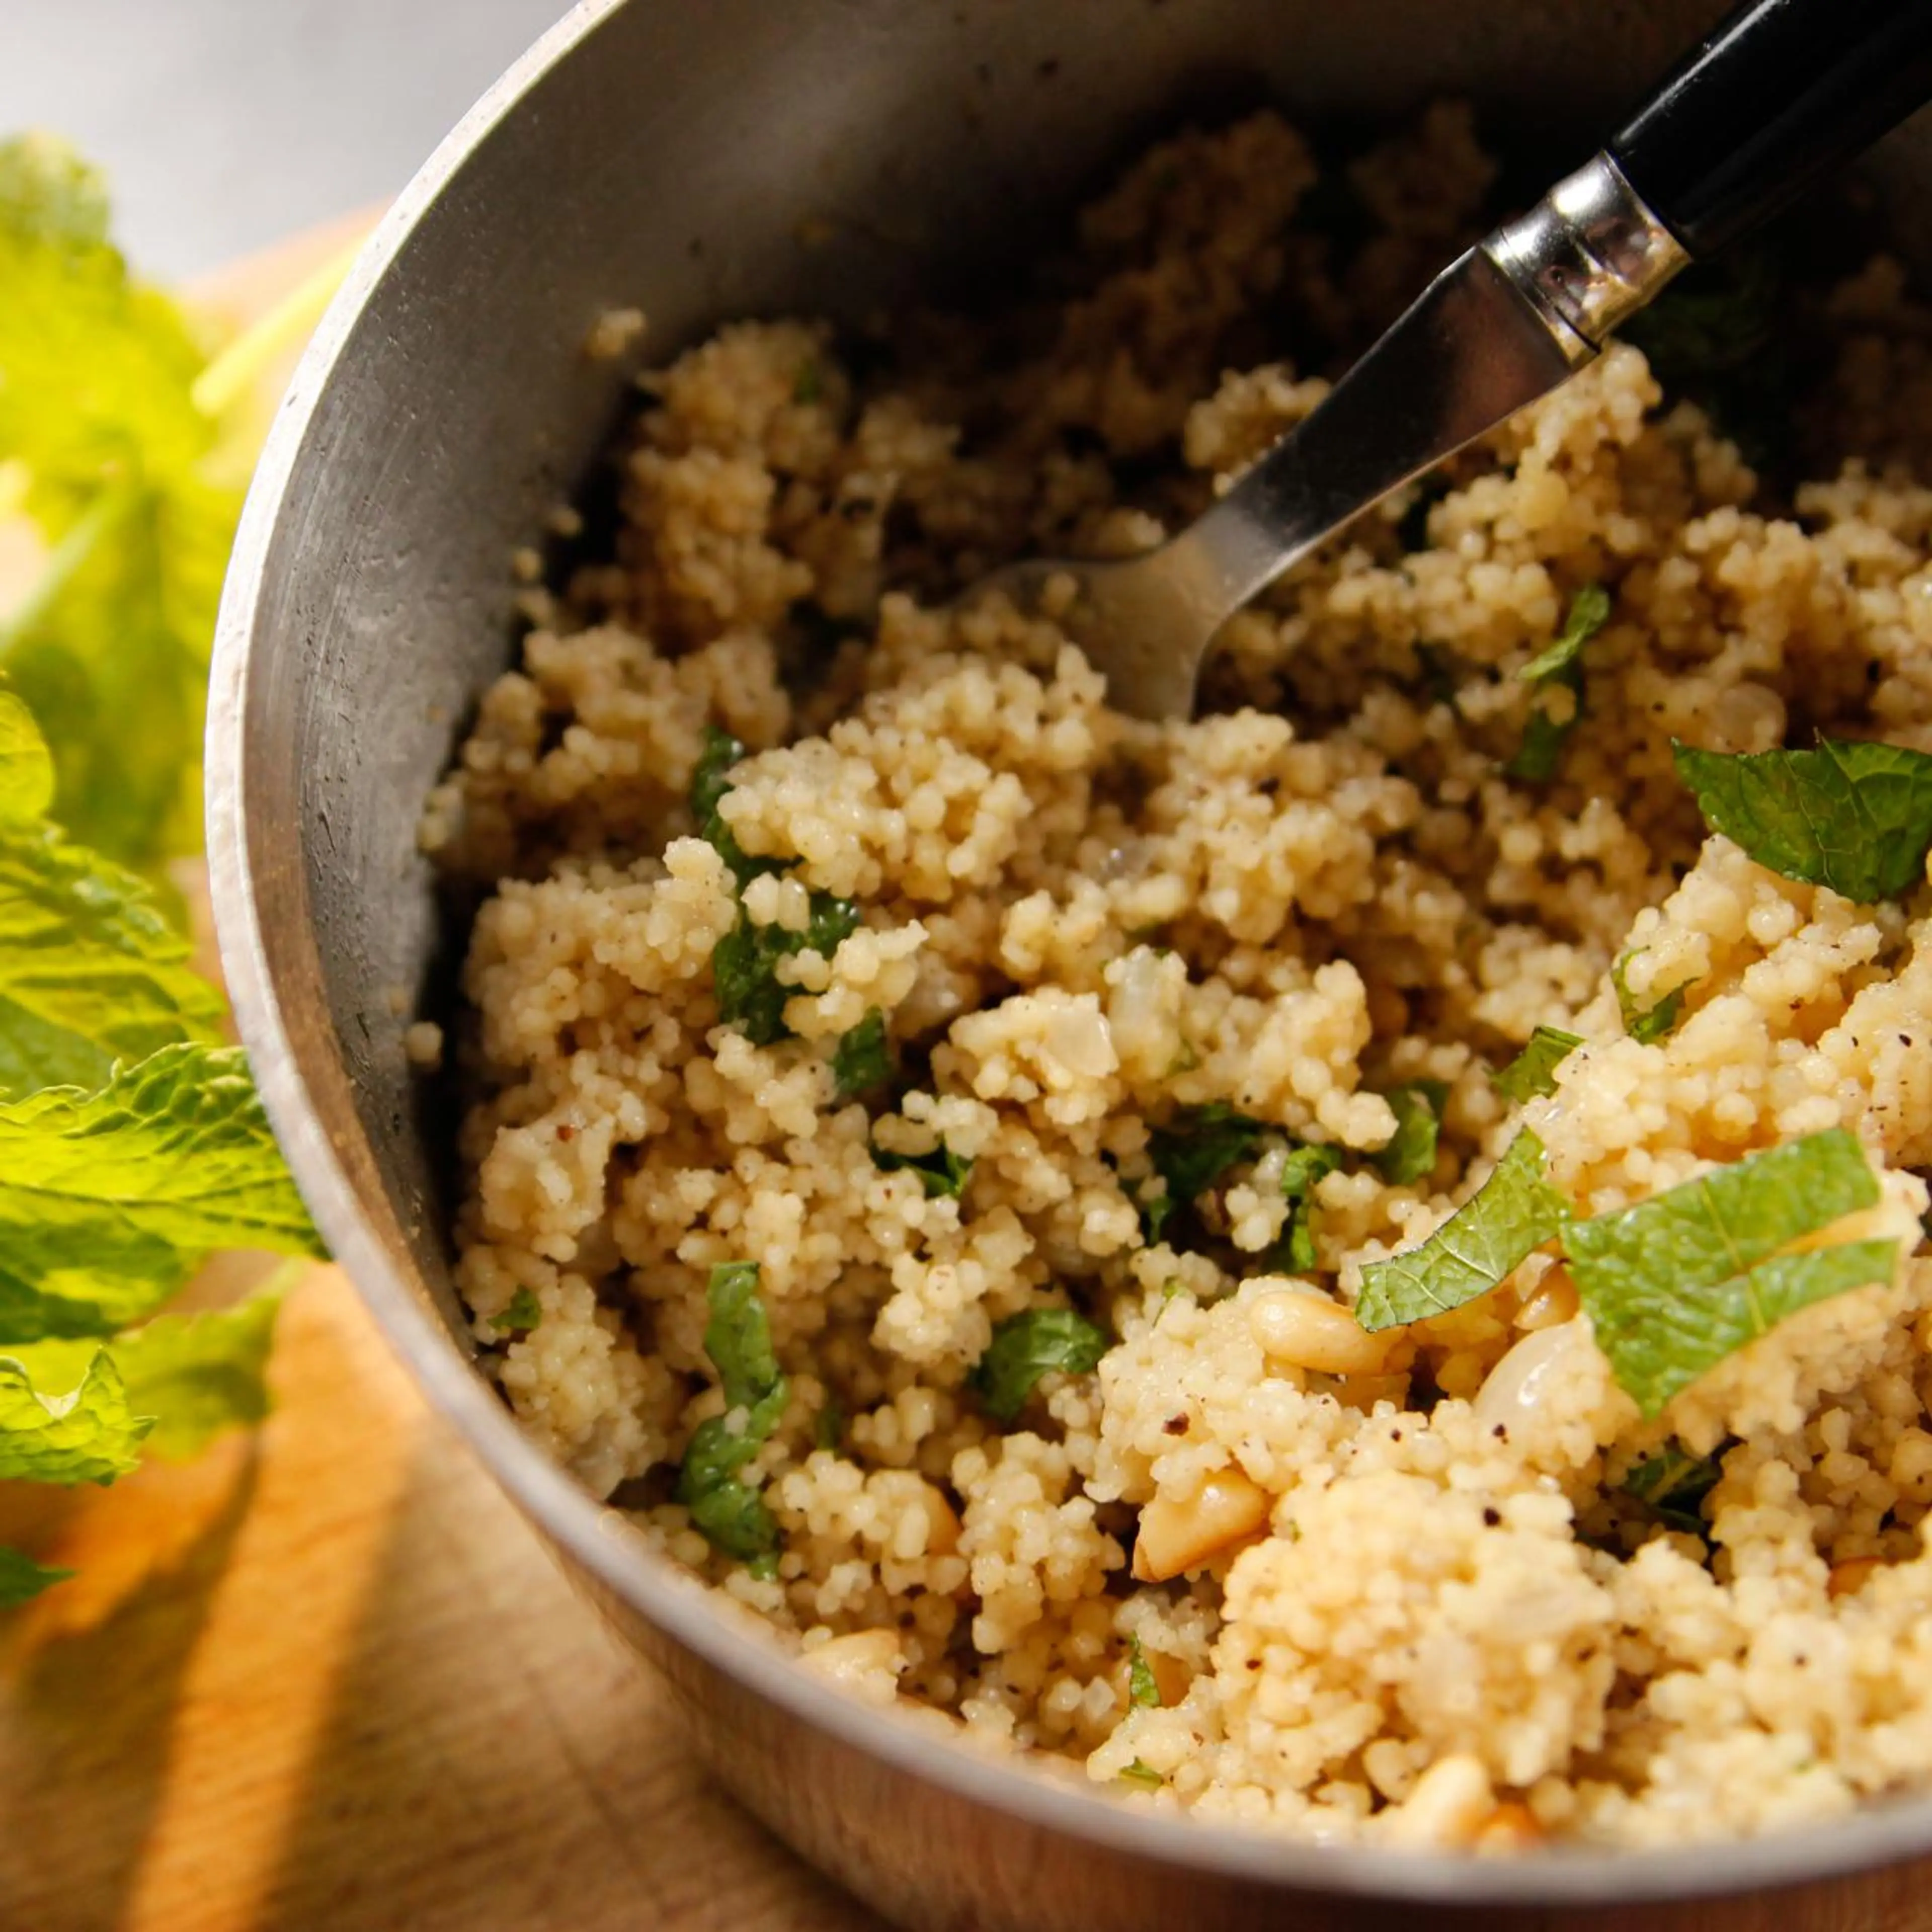 Couscous With Pine Nuts and Mint